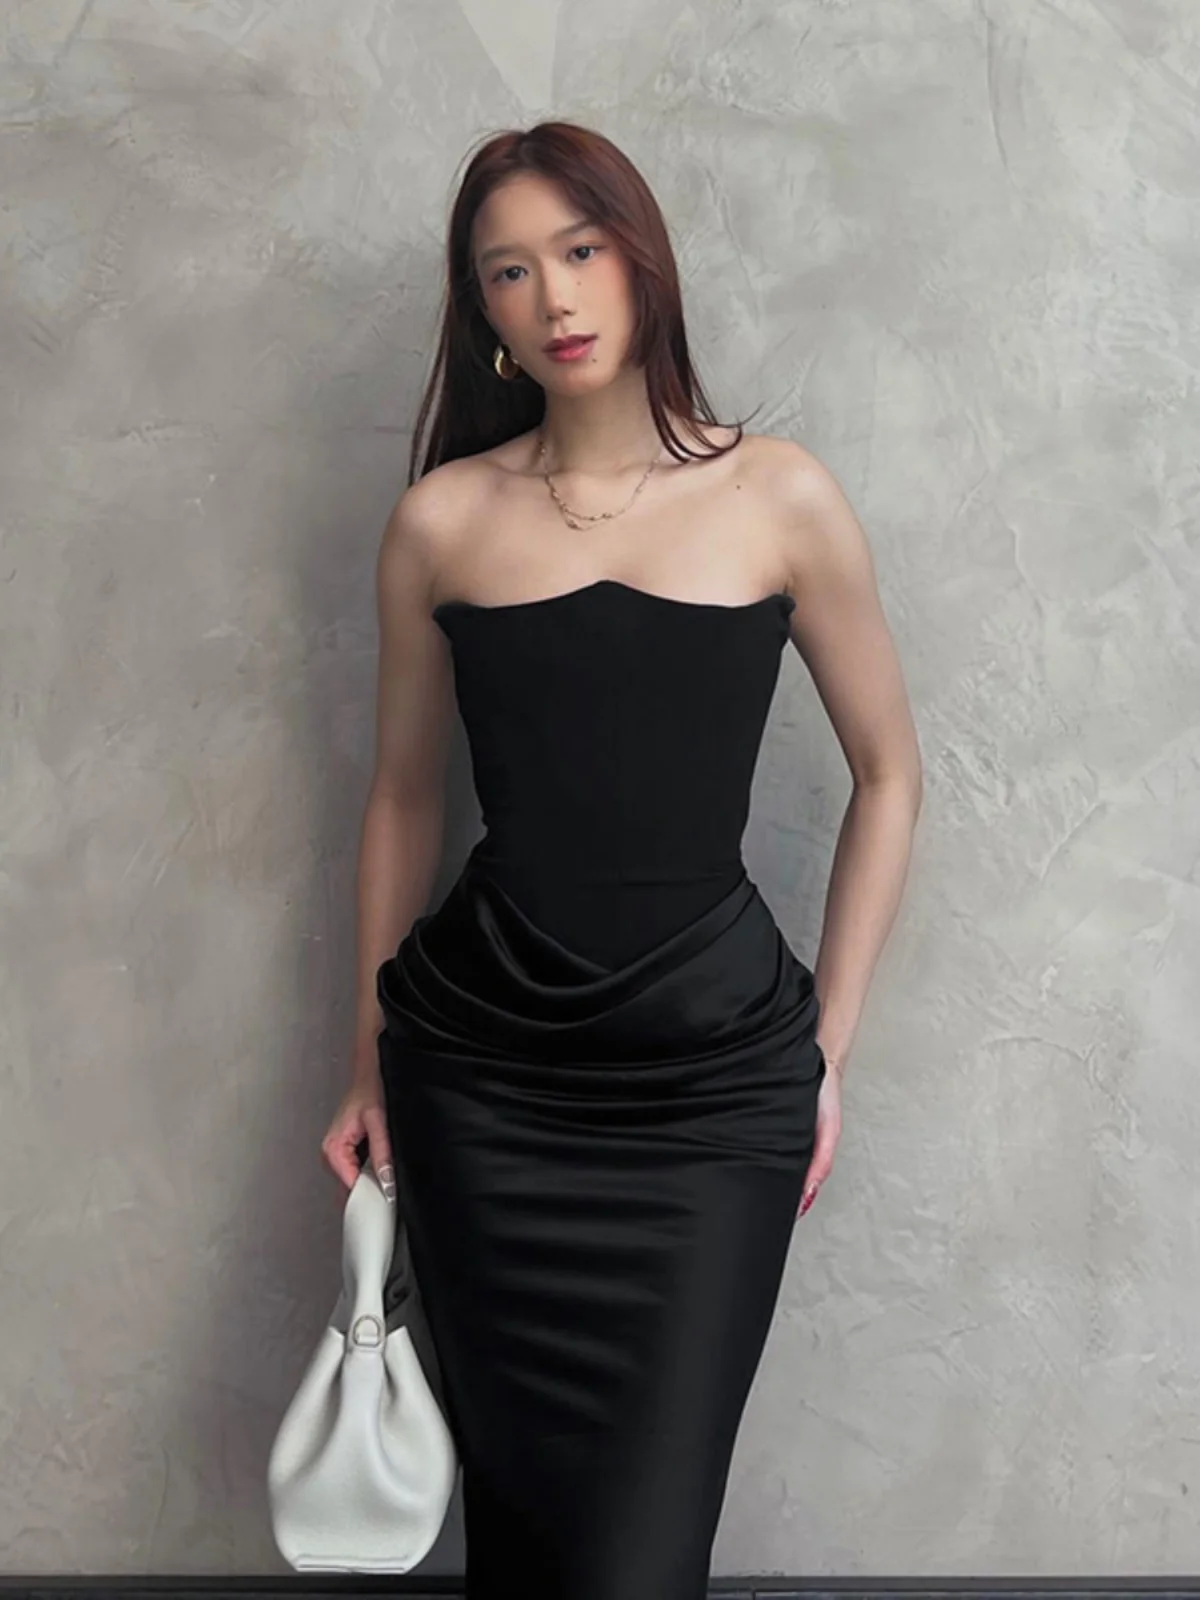 

Design Strapless Dress With Slim Fit And A Fishbone Wrap Around The Buttocks